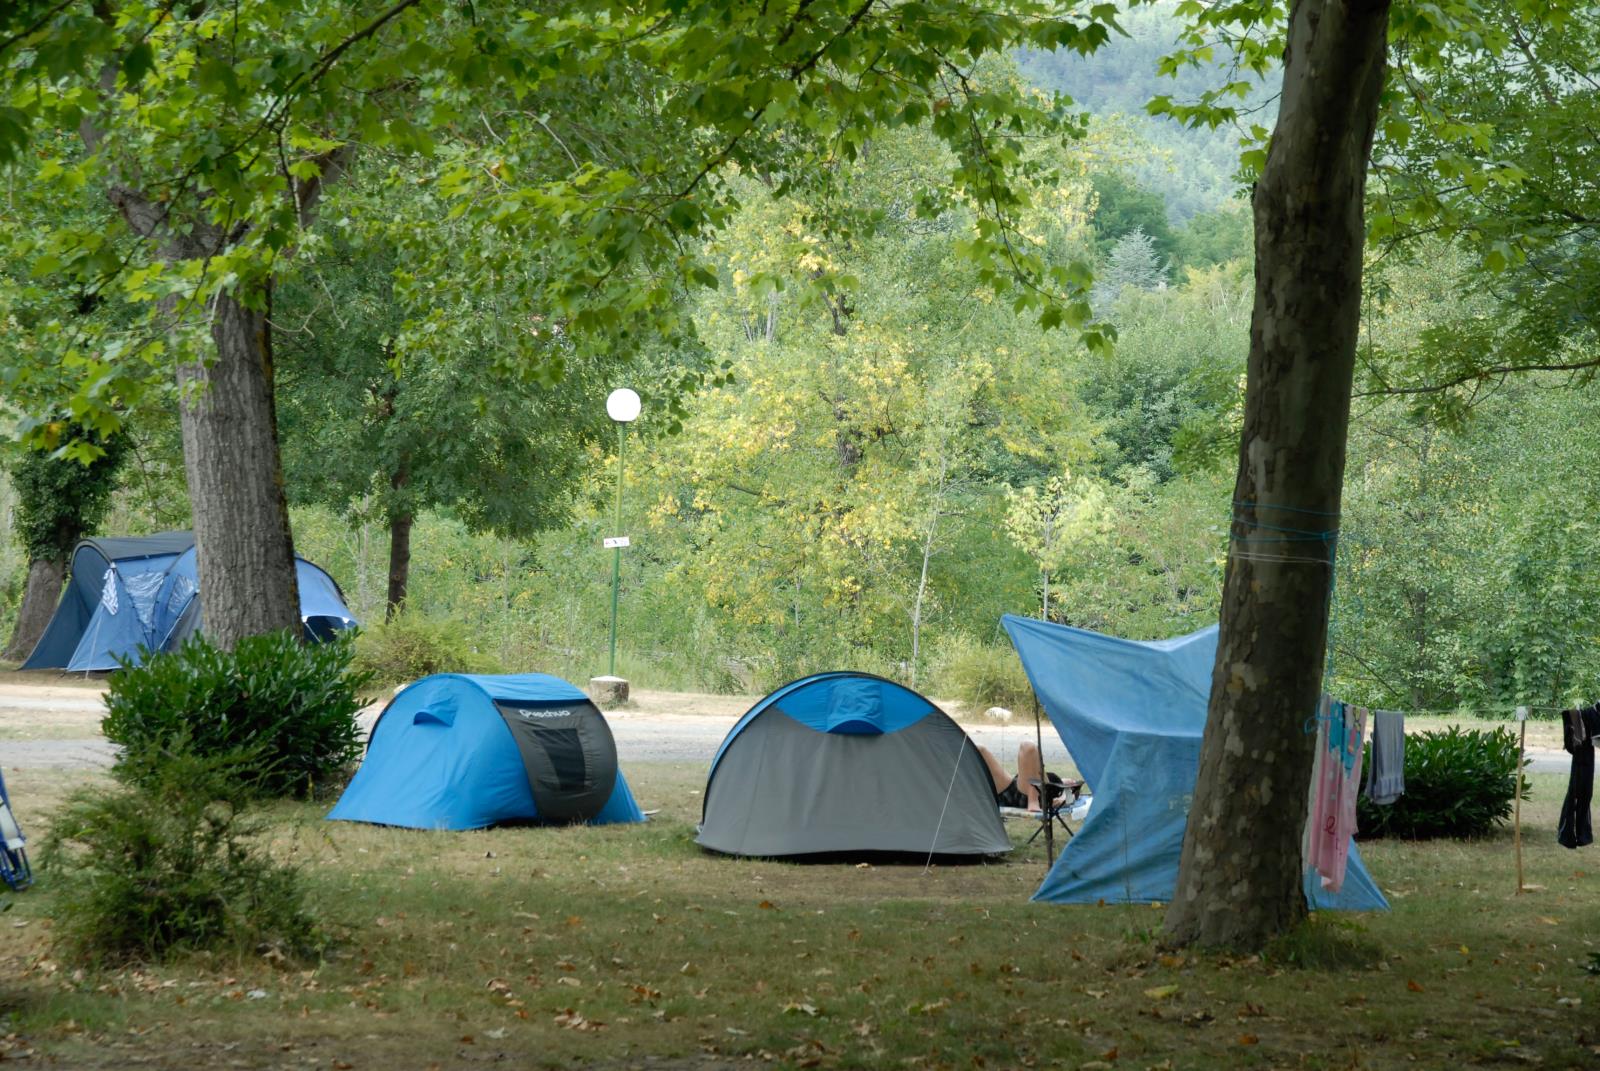 Parcela - Hicker Package ( 1 Person (Walker Or Cyclist), 1 Tent) - Camping Le Pont du Tarn